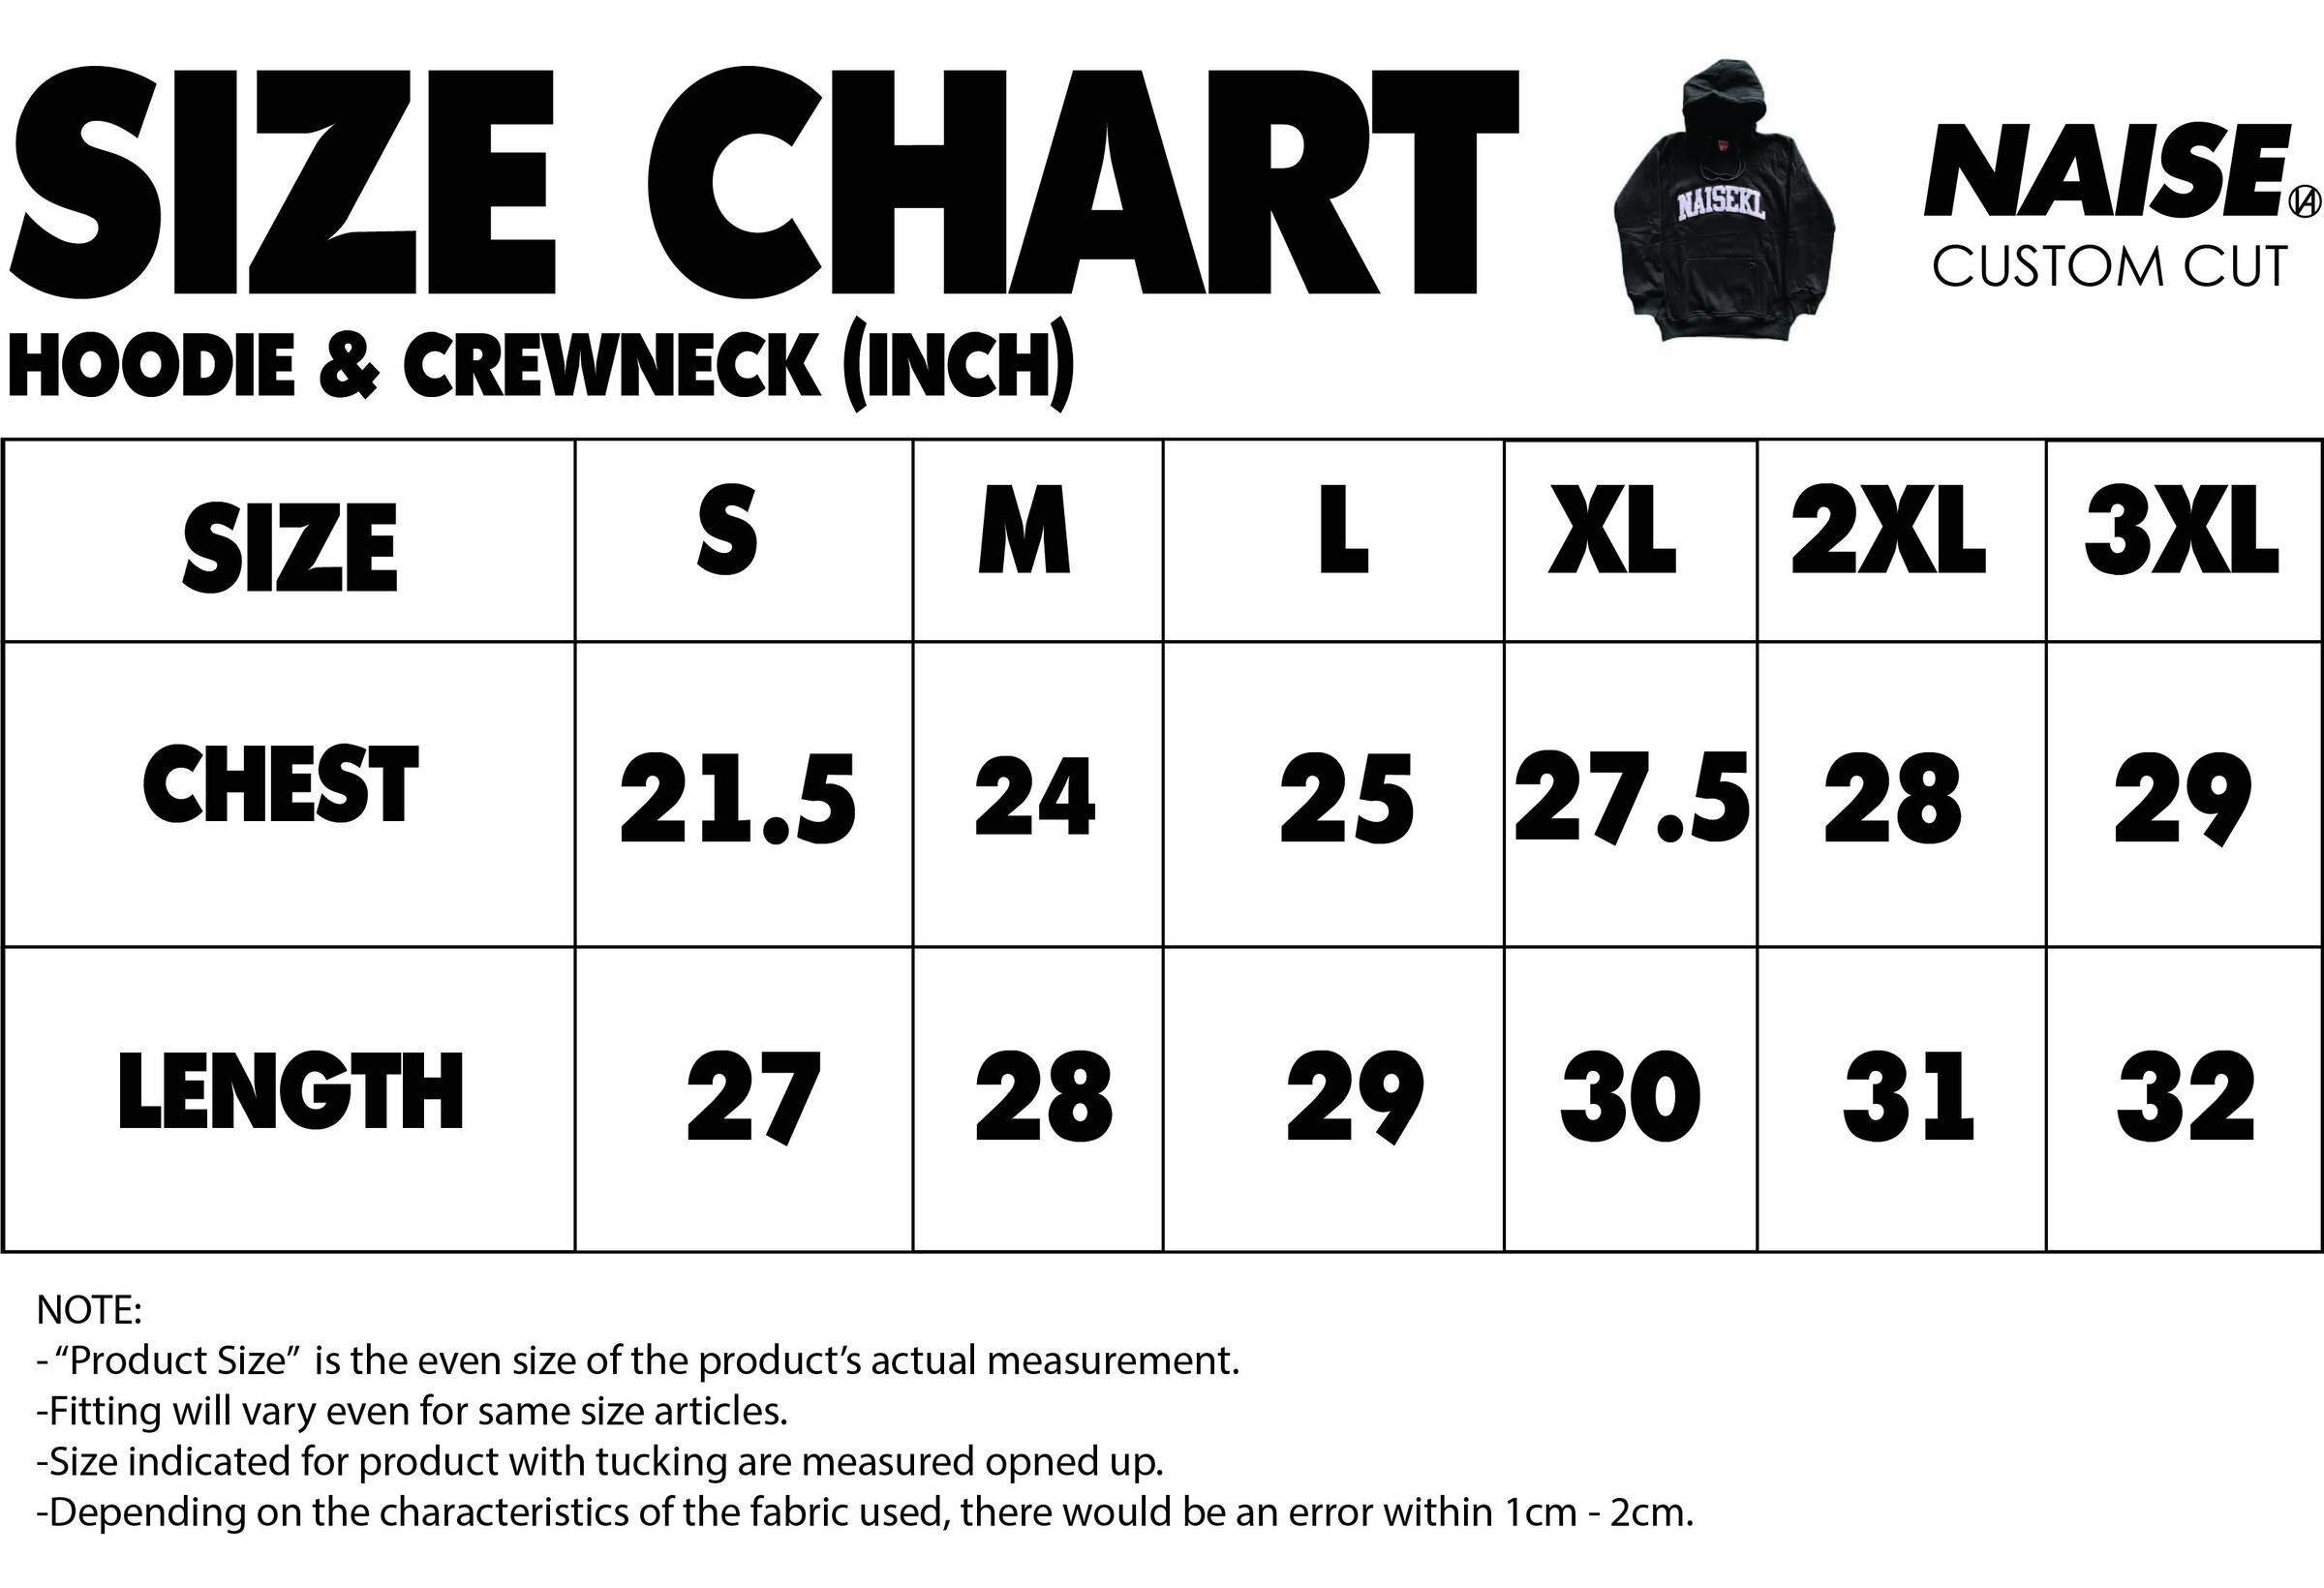 SIZE CHART HOODIE & CREWNECK 2023 MUQRIE NOTE INCLUDED